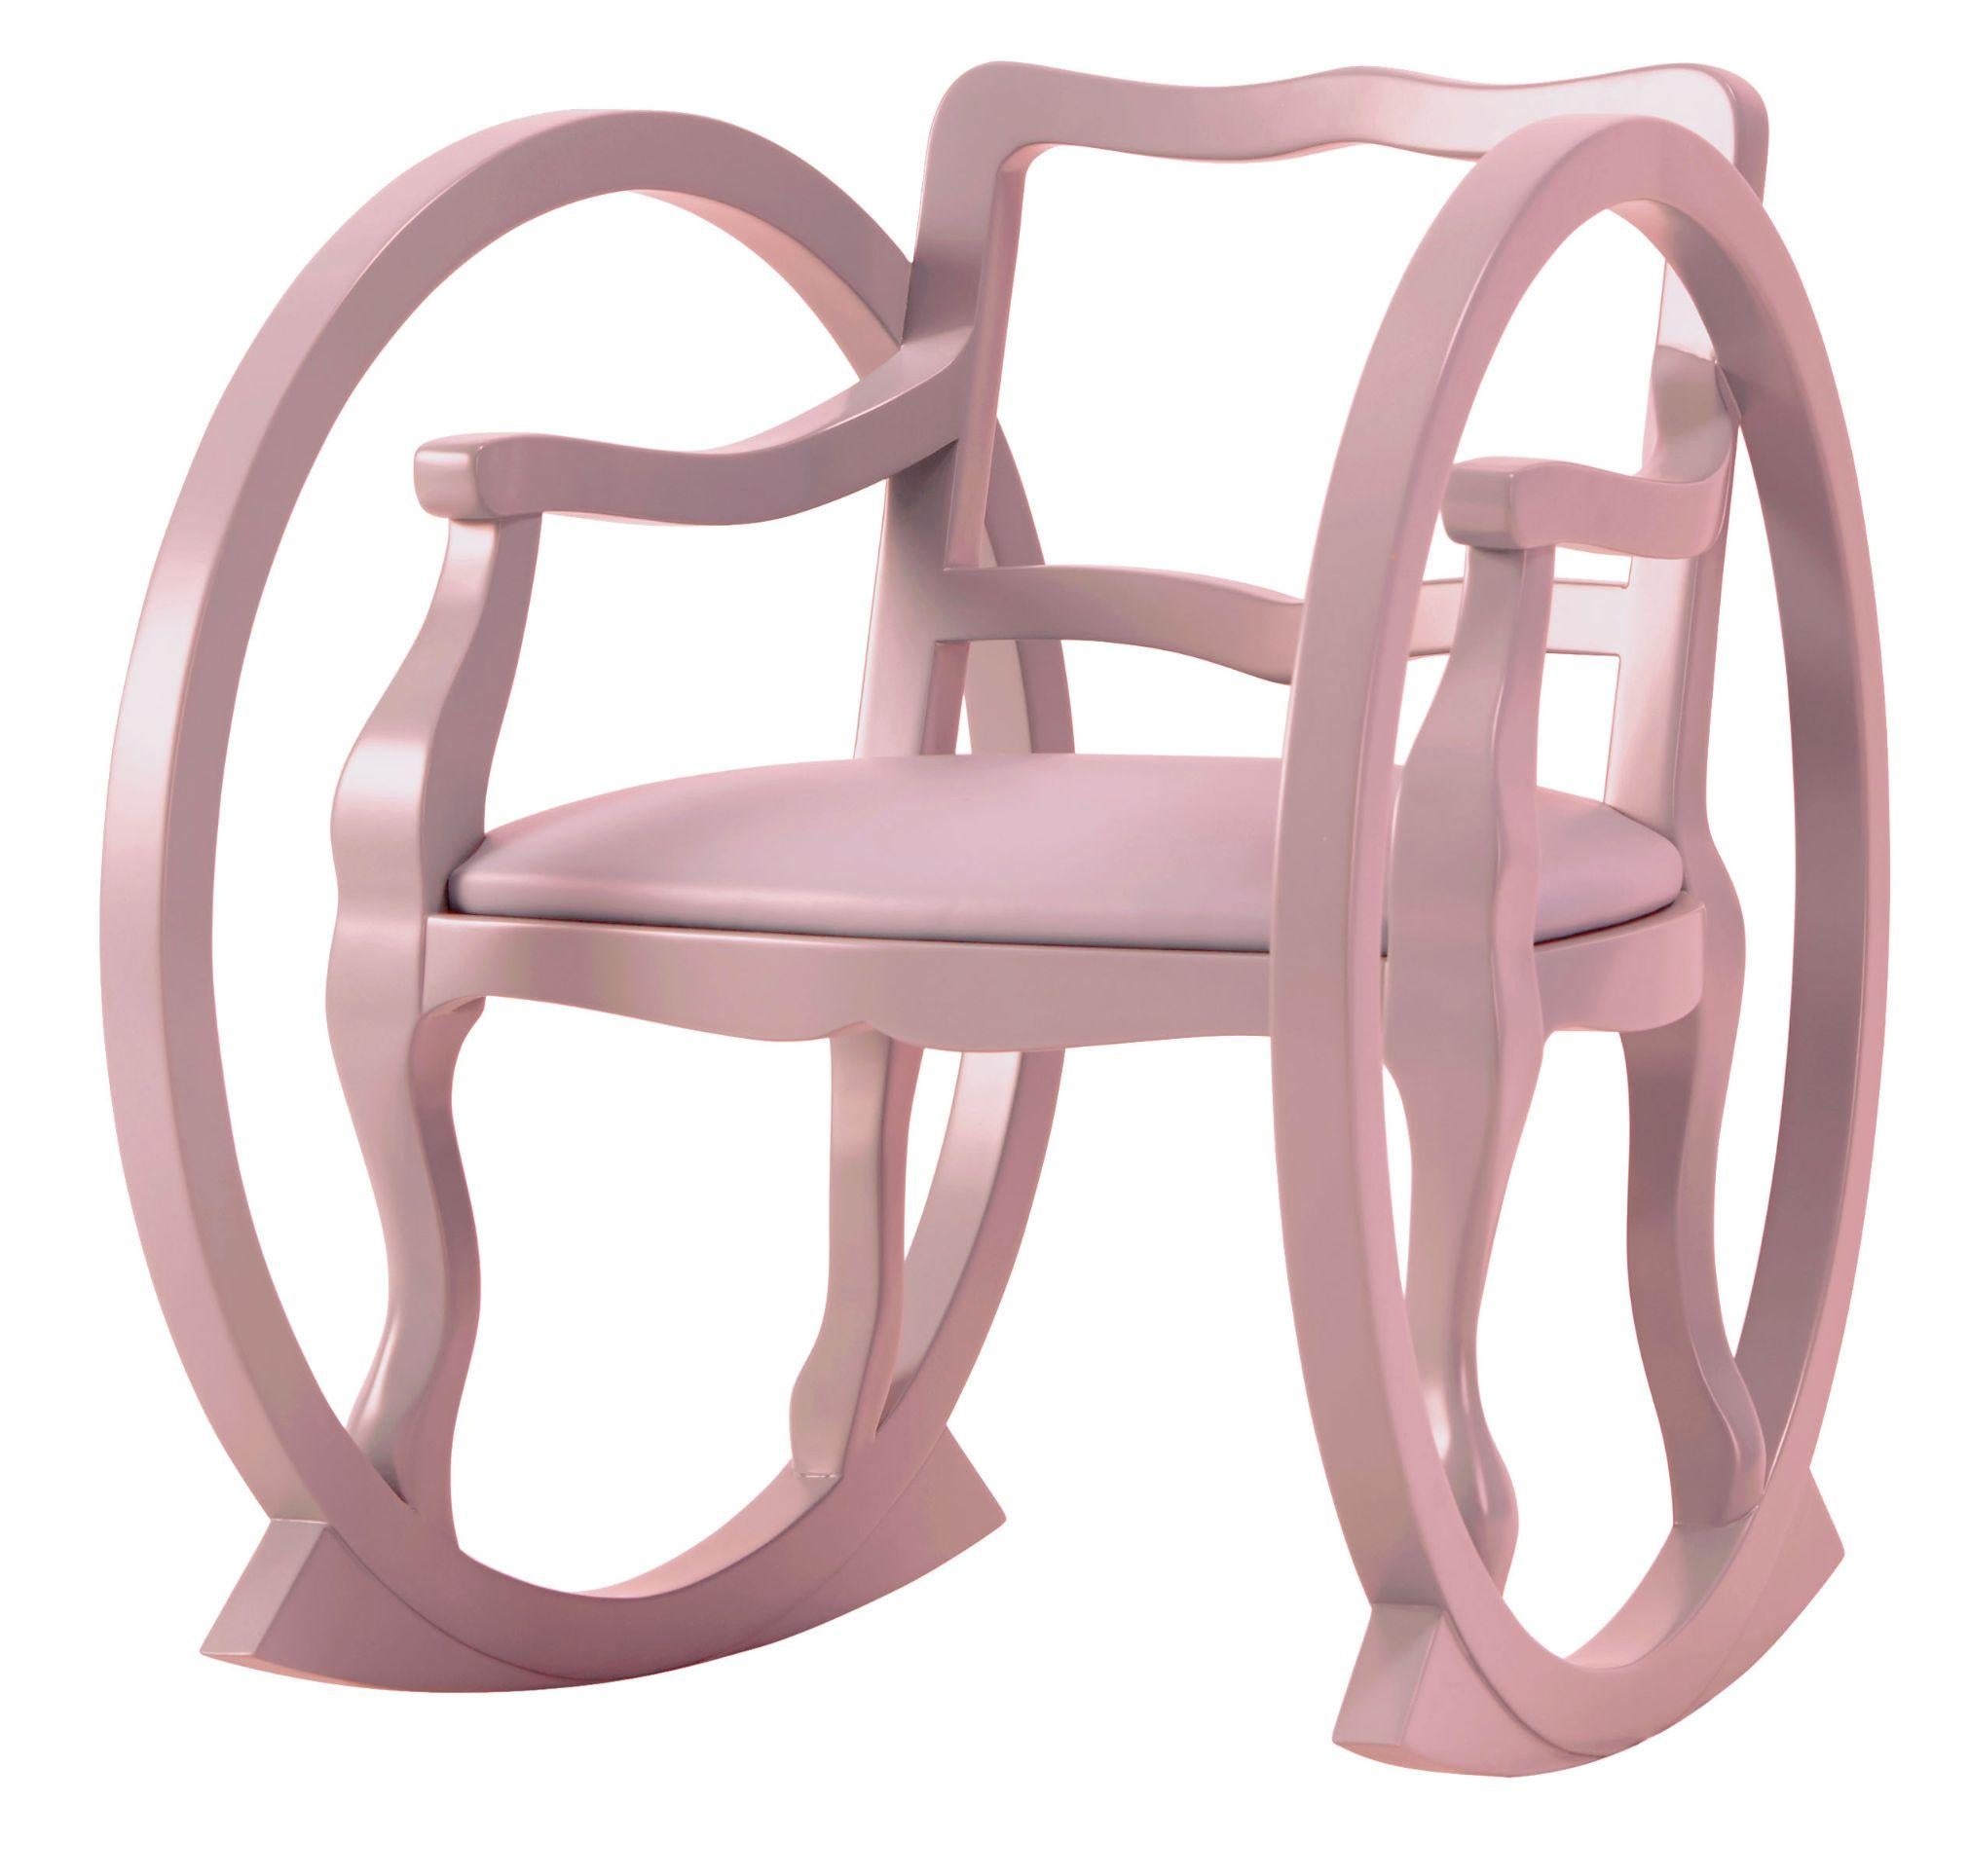 Beech Kids Contemporary Rocking Chair Designed by Thomas Dariel